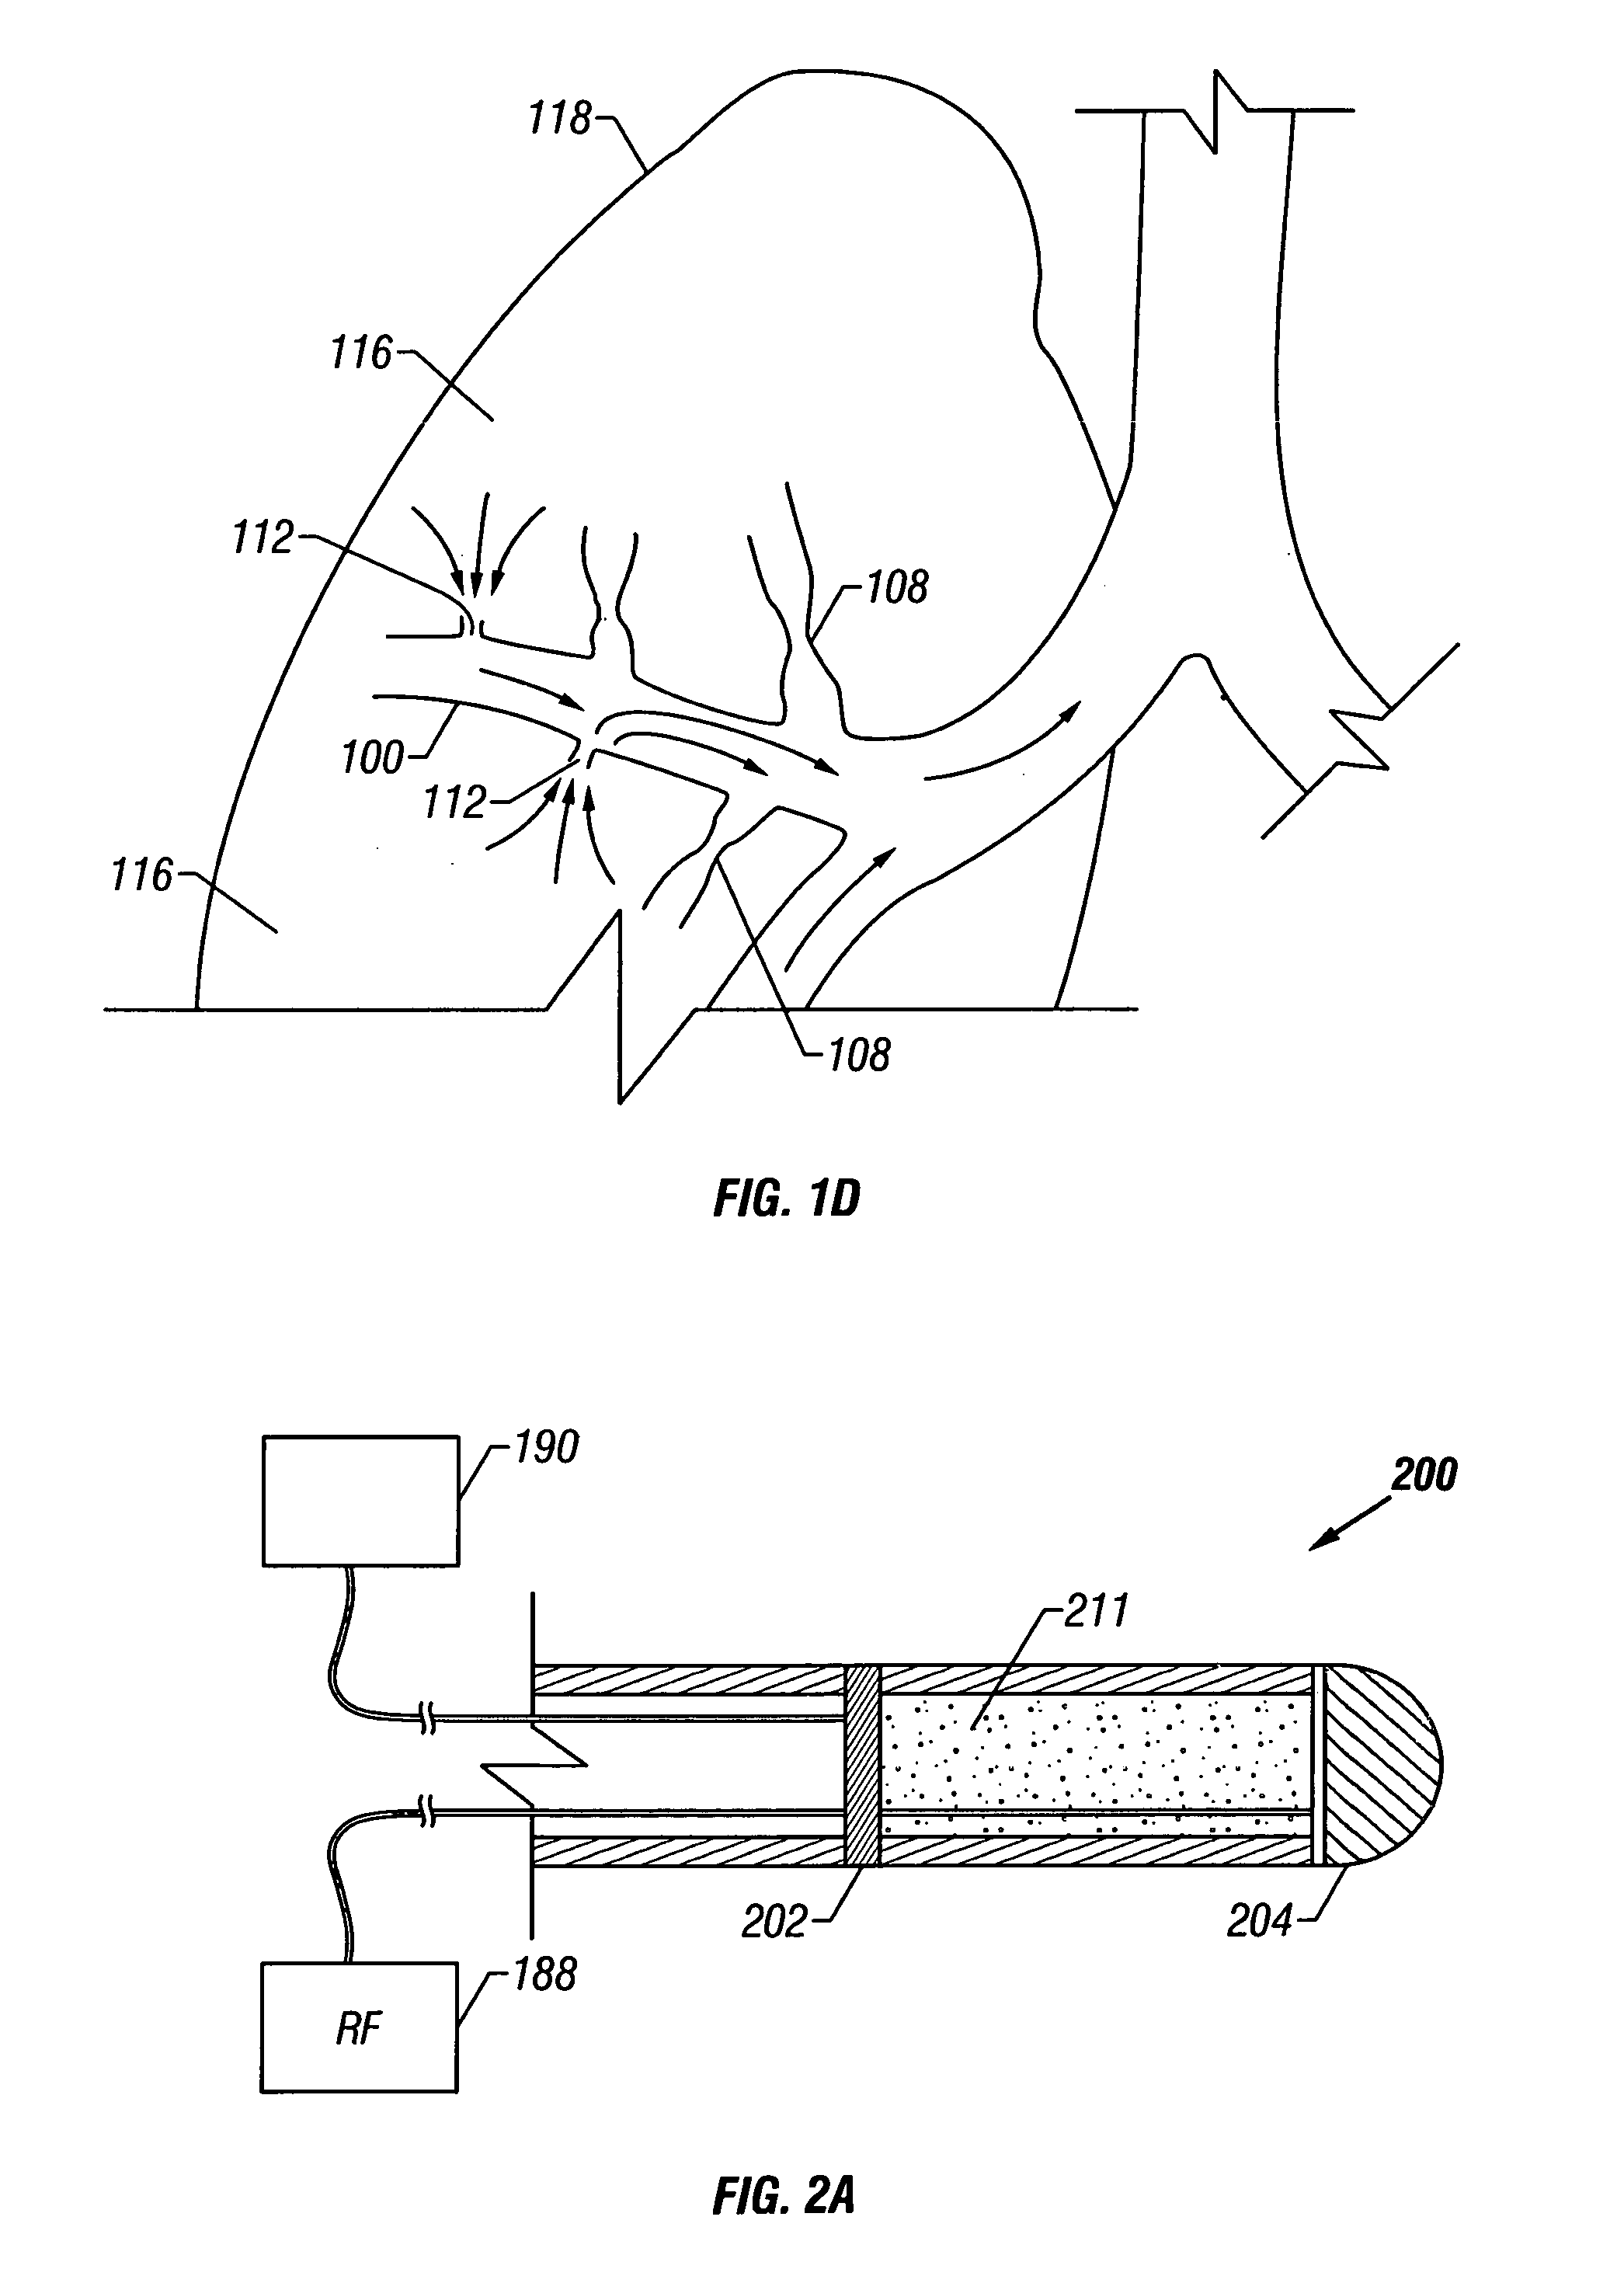 Multifunctional tip catheter for applying energy to tissue and detecting the presence of blood flow